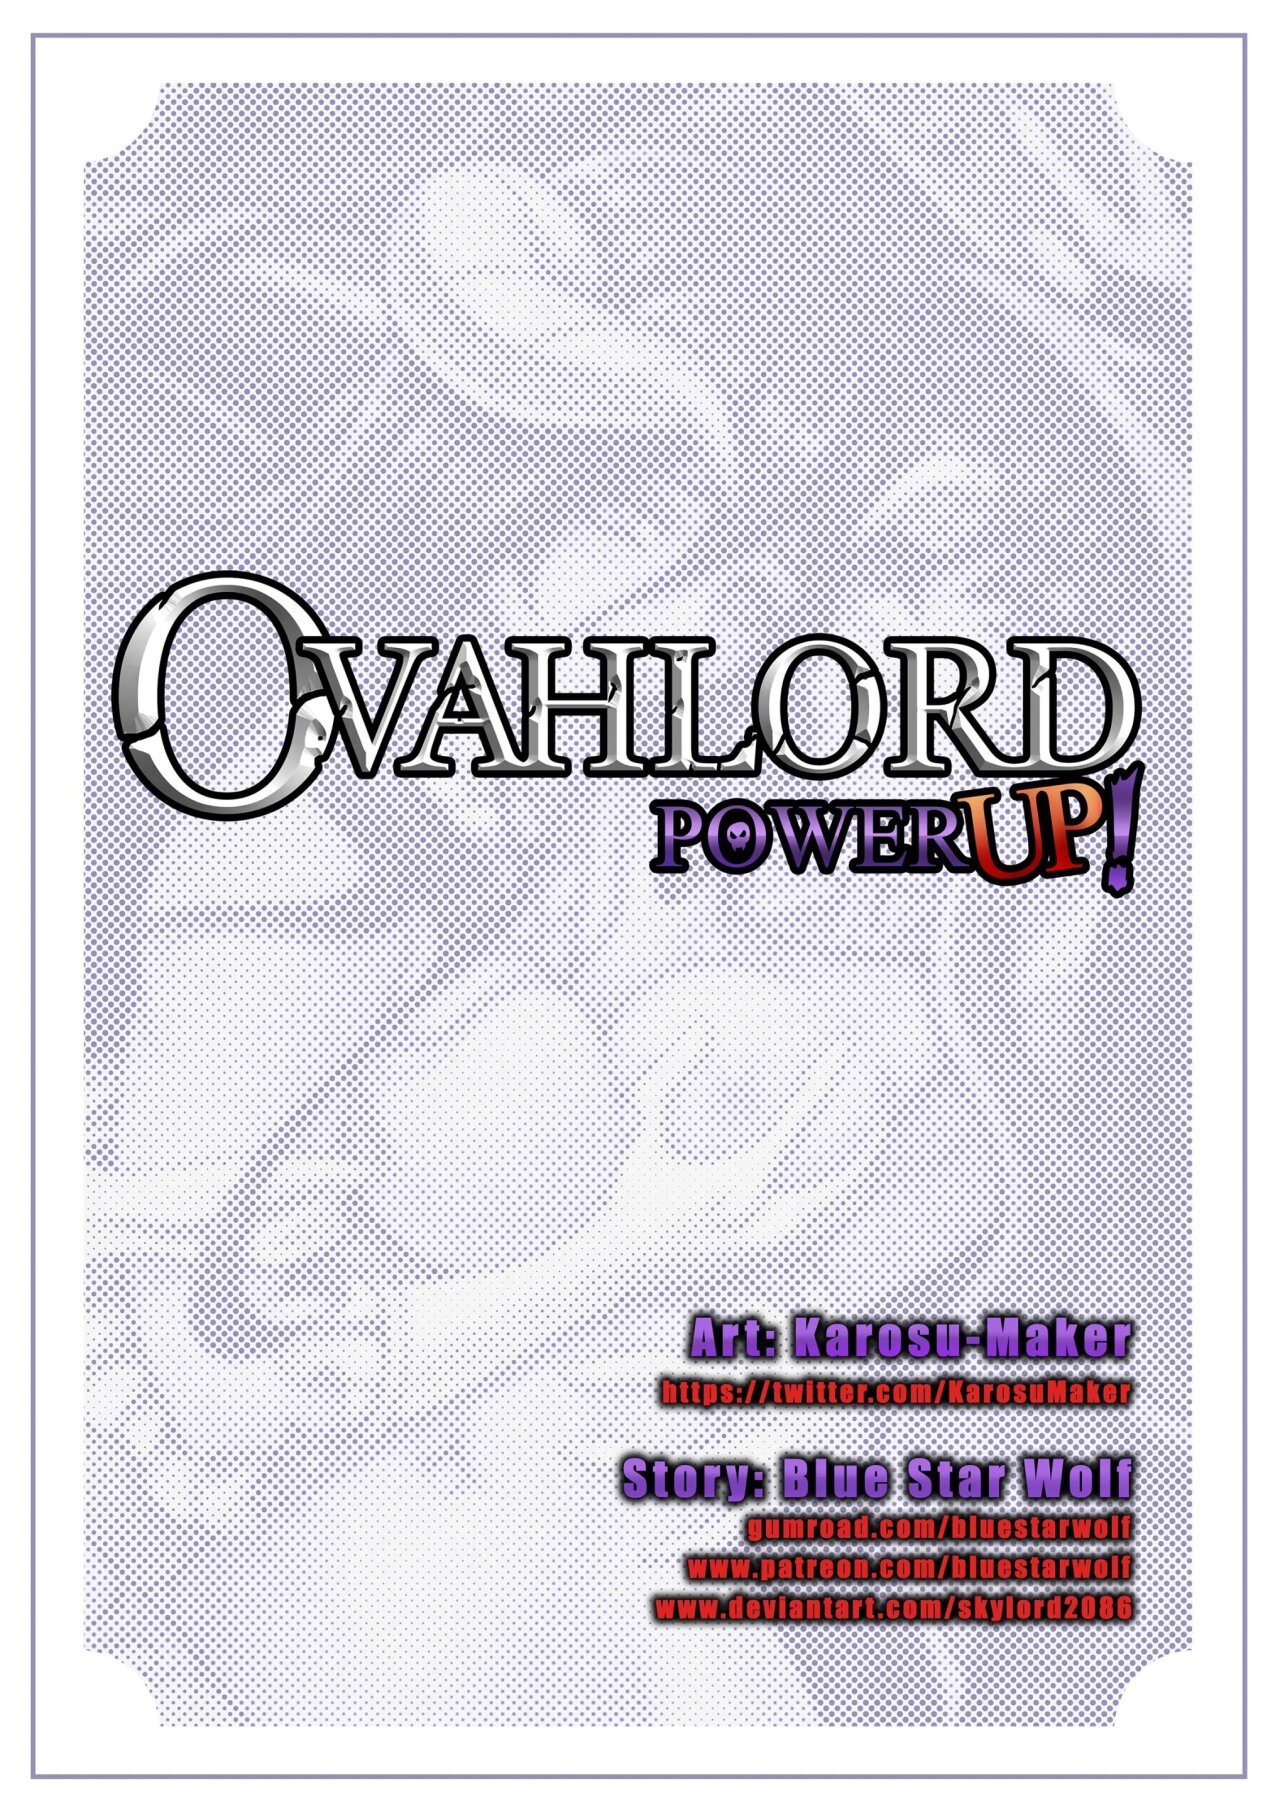 Overlord - Ovahlord Power Up! - 1